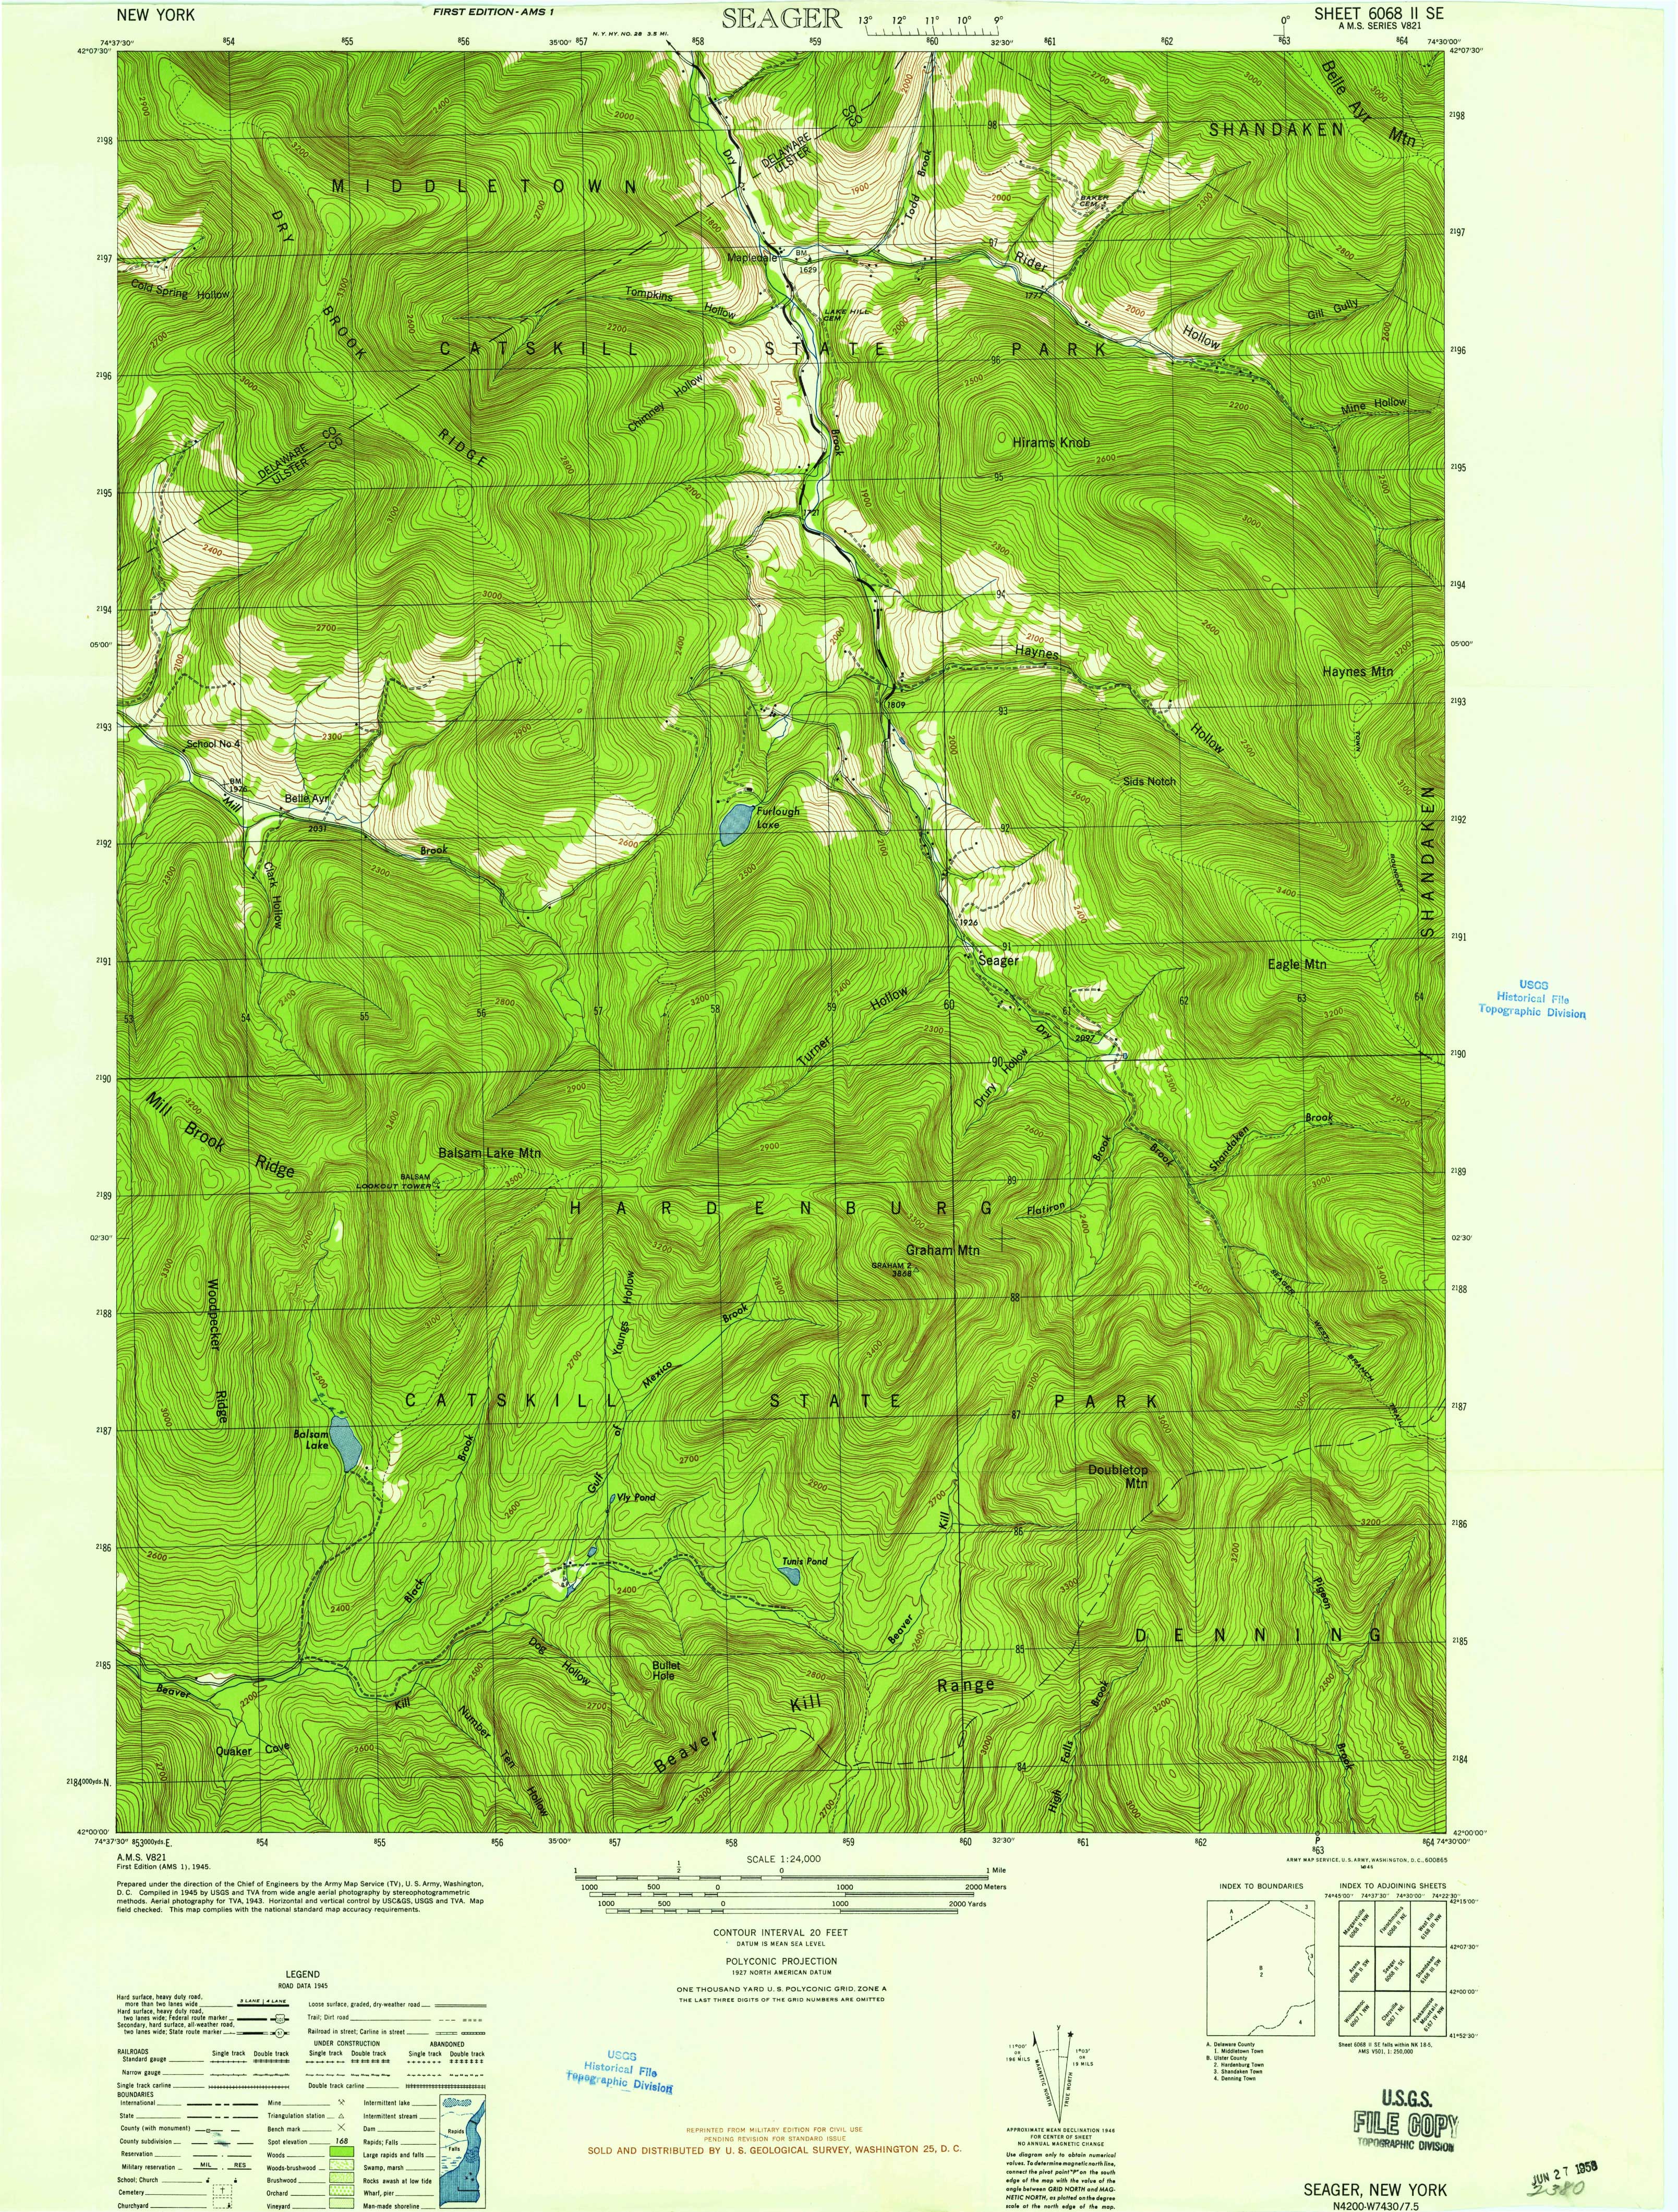 1945 USGS topographical map of Seager